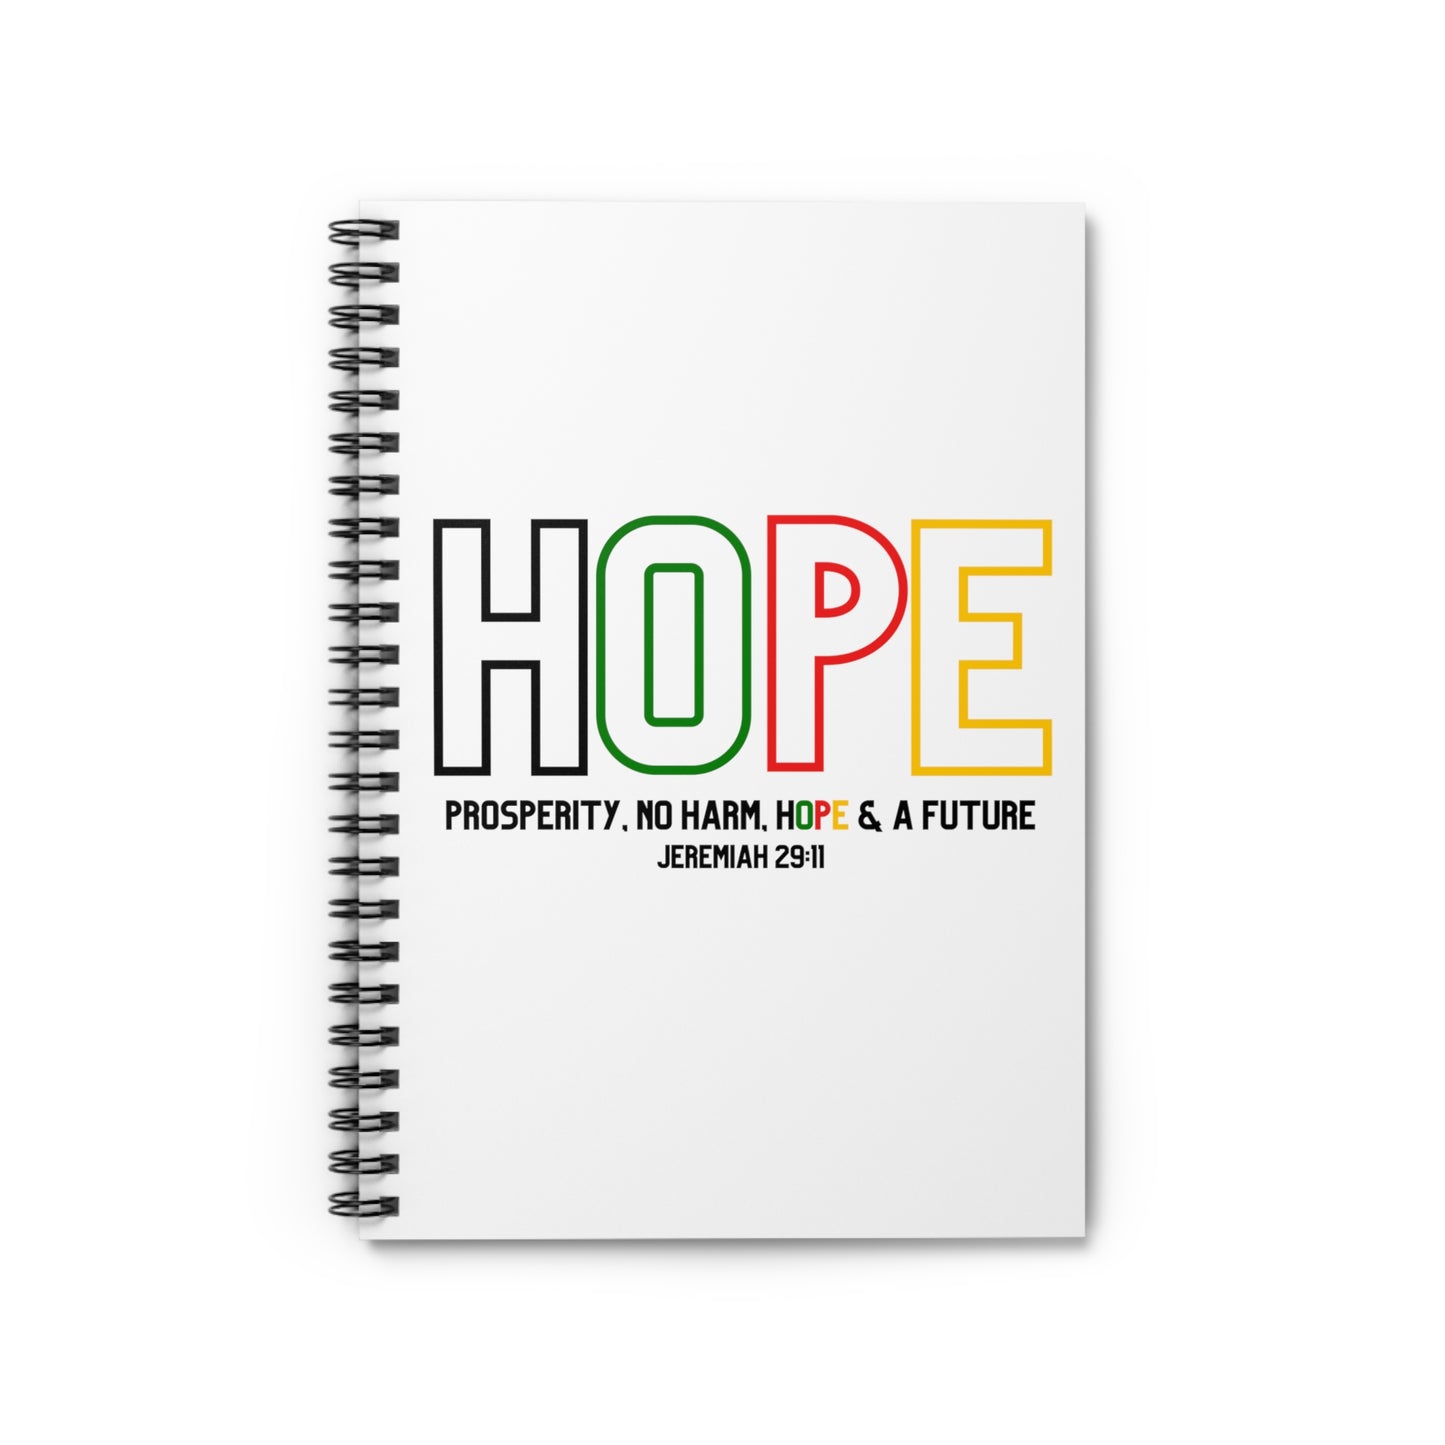 HOPE Jeremiah 29:11 Spiral Notebook - Ruled Line